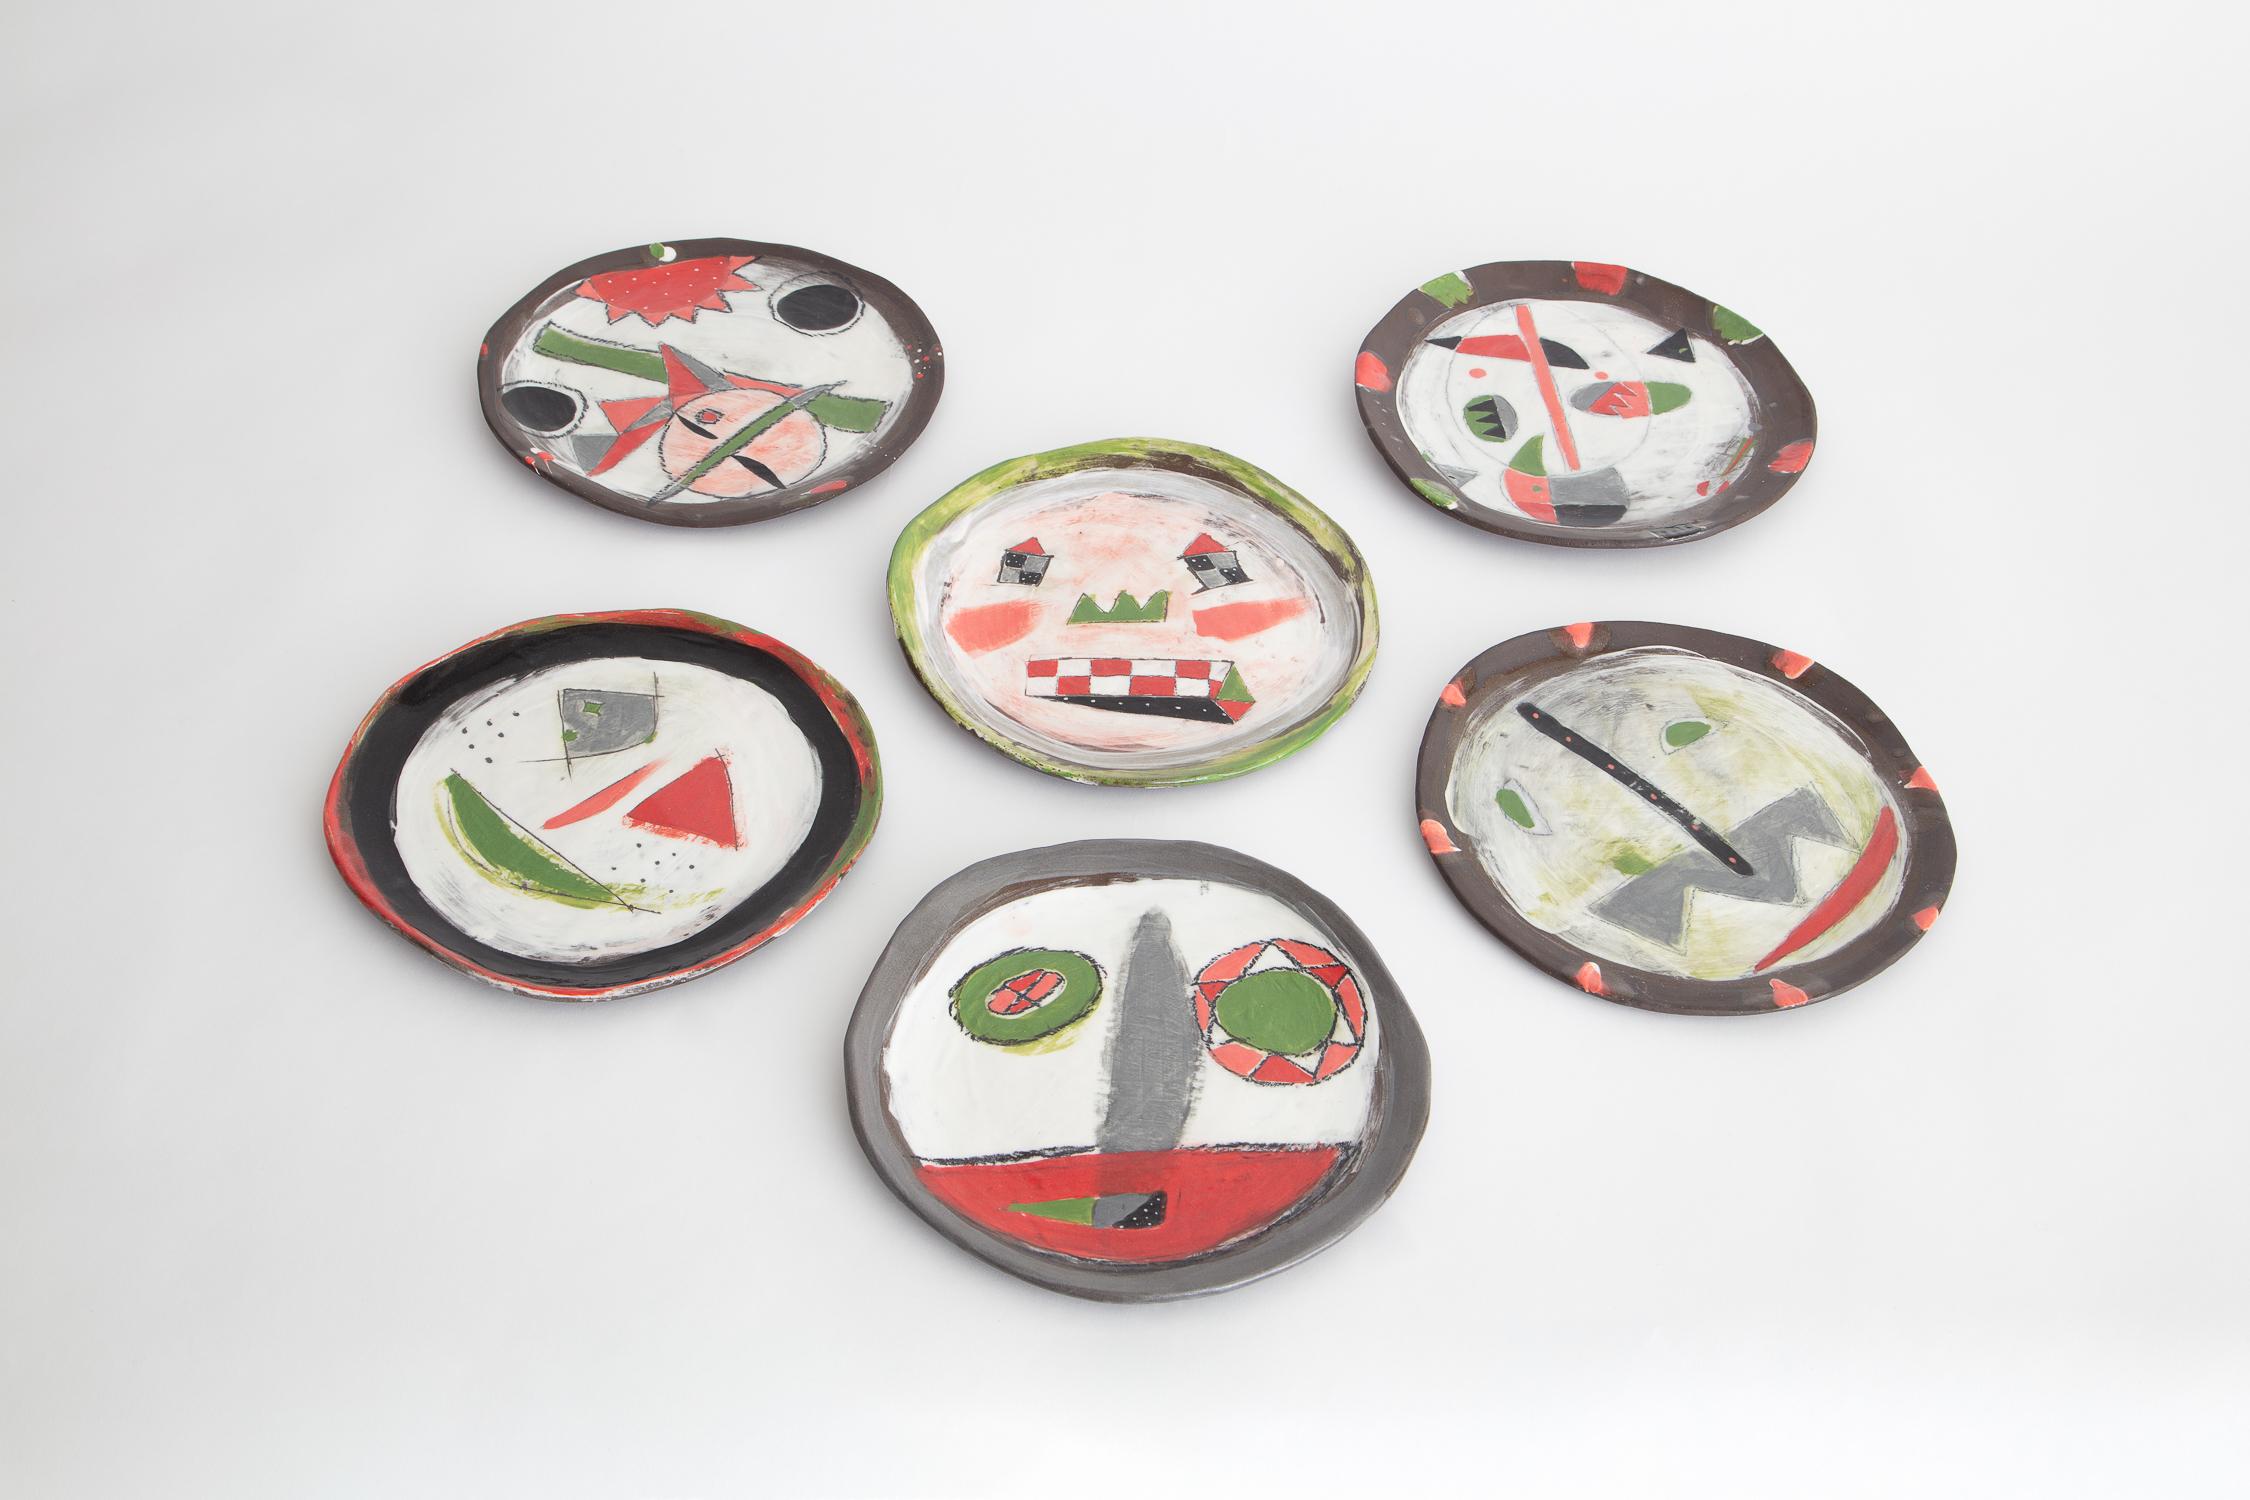 For Fortmakers' 2019 Surrealist-inspired show The Dinner Guests, ceramic artist Shino Takeda handcrafted and painted a series of playful, anthropomorphic plates, each adorned with their own unique visage.

Handmade by Shino Takeda
Materials: